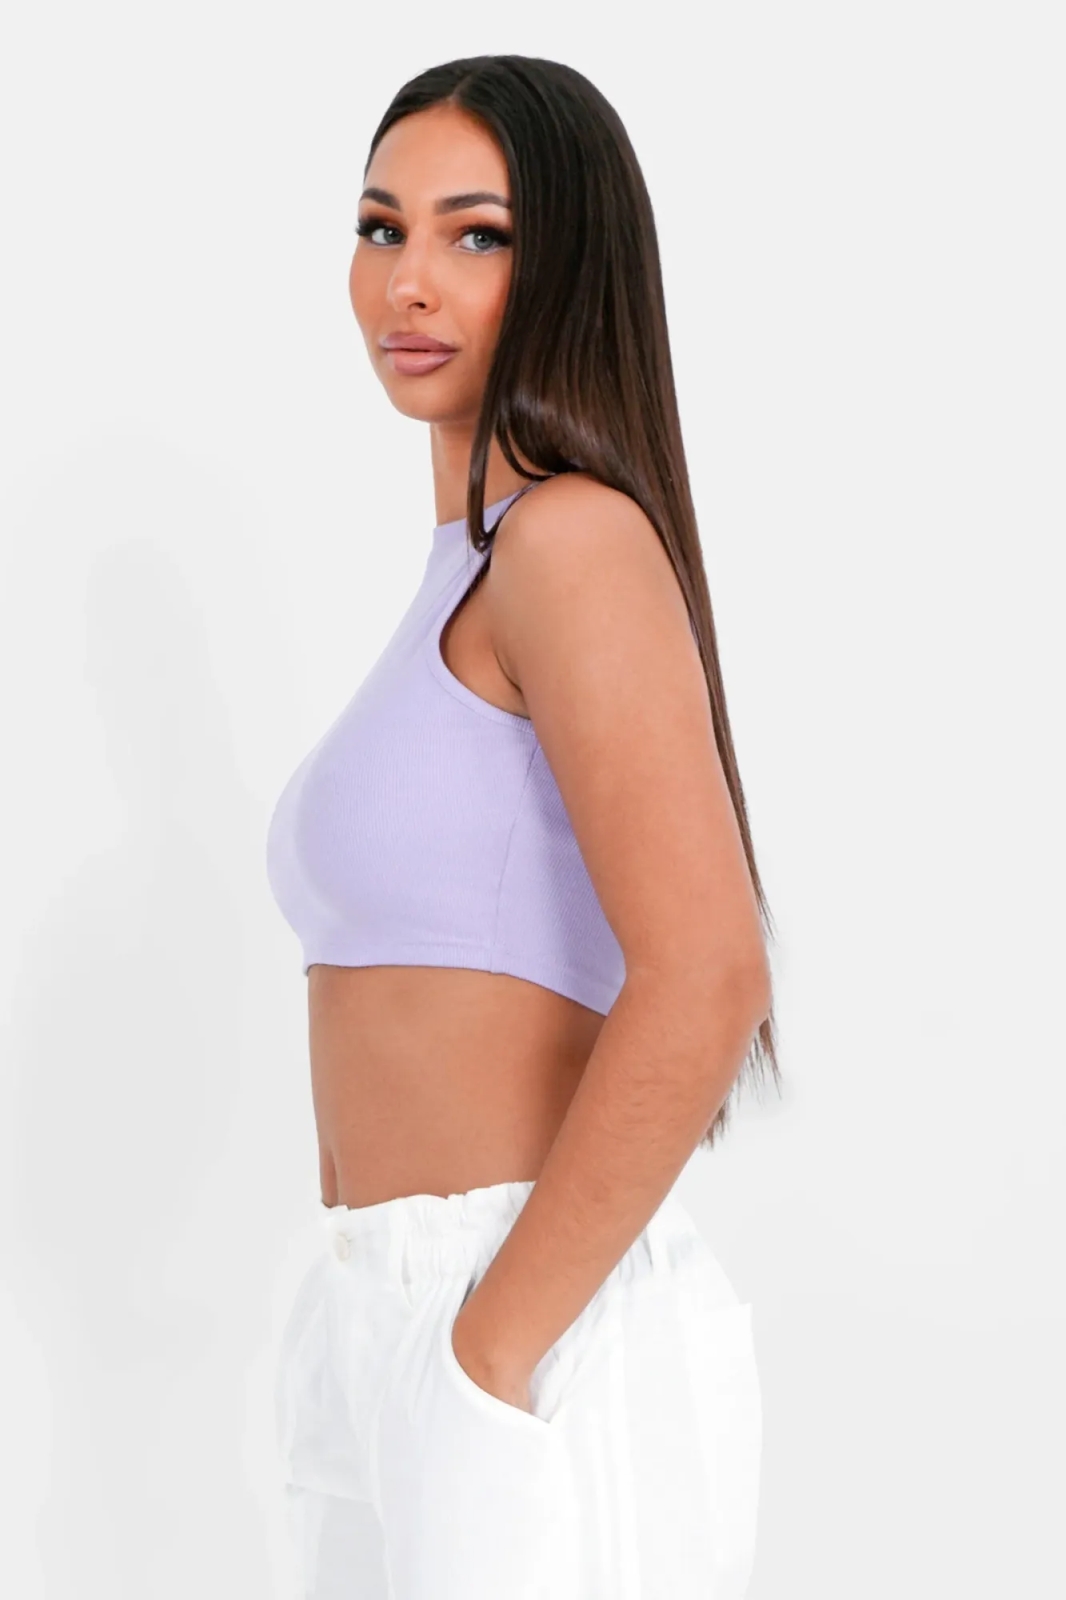 Sixth June Logo Cropped Top - Lilac